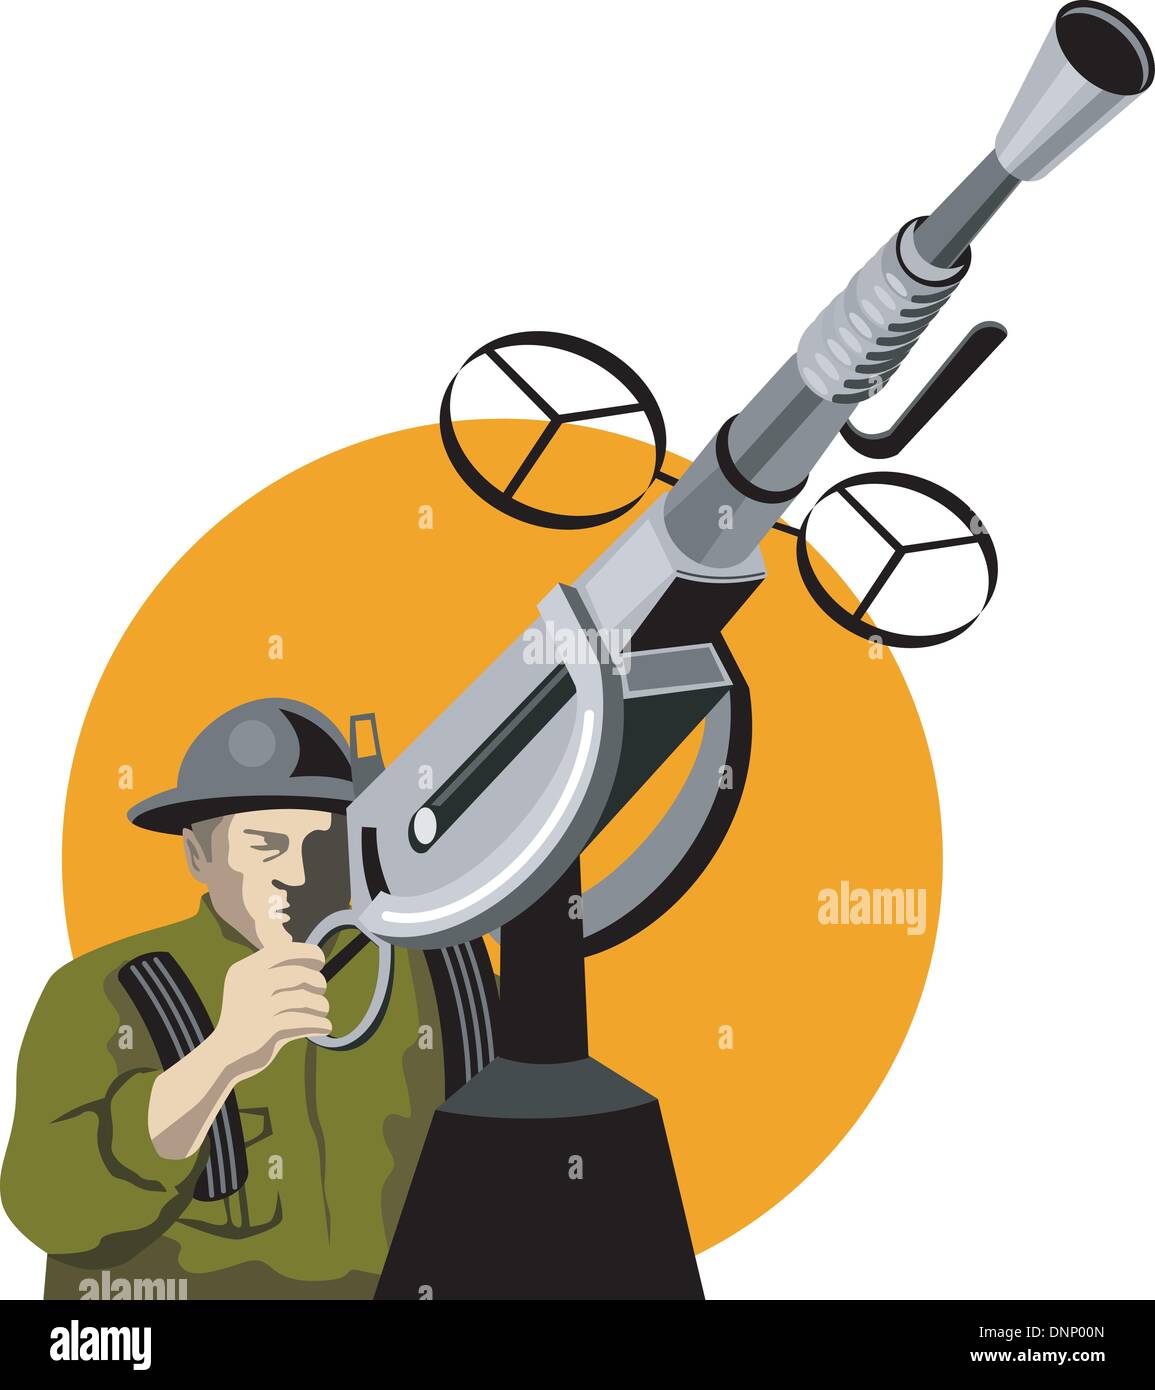 Illustration of a world war two british soldier with anti-aircraft machine gun cannon done in retro style. Stock Vector